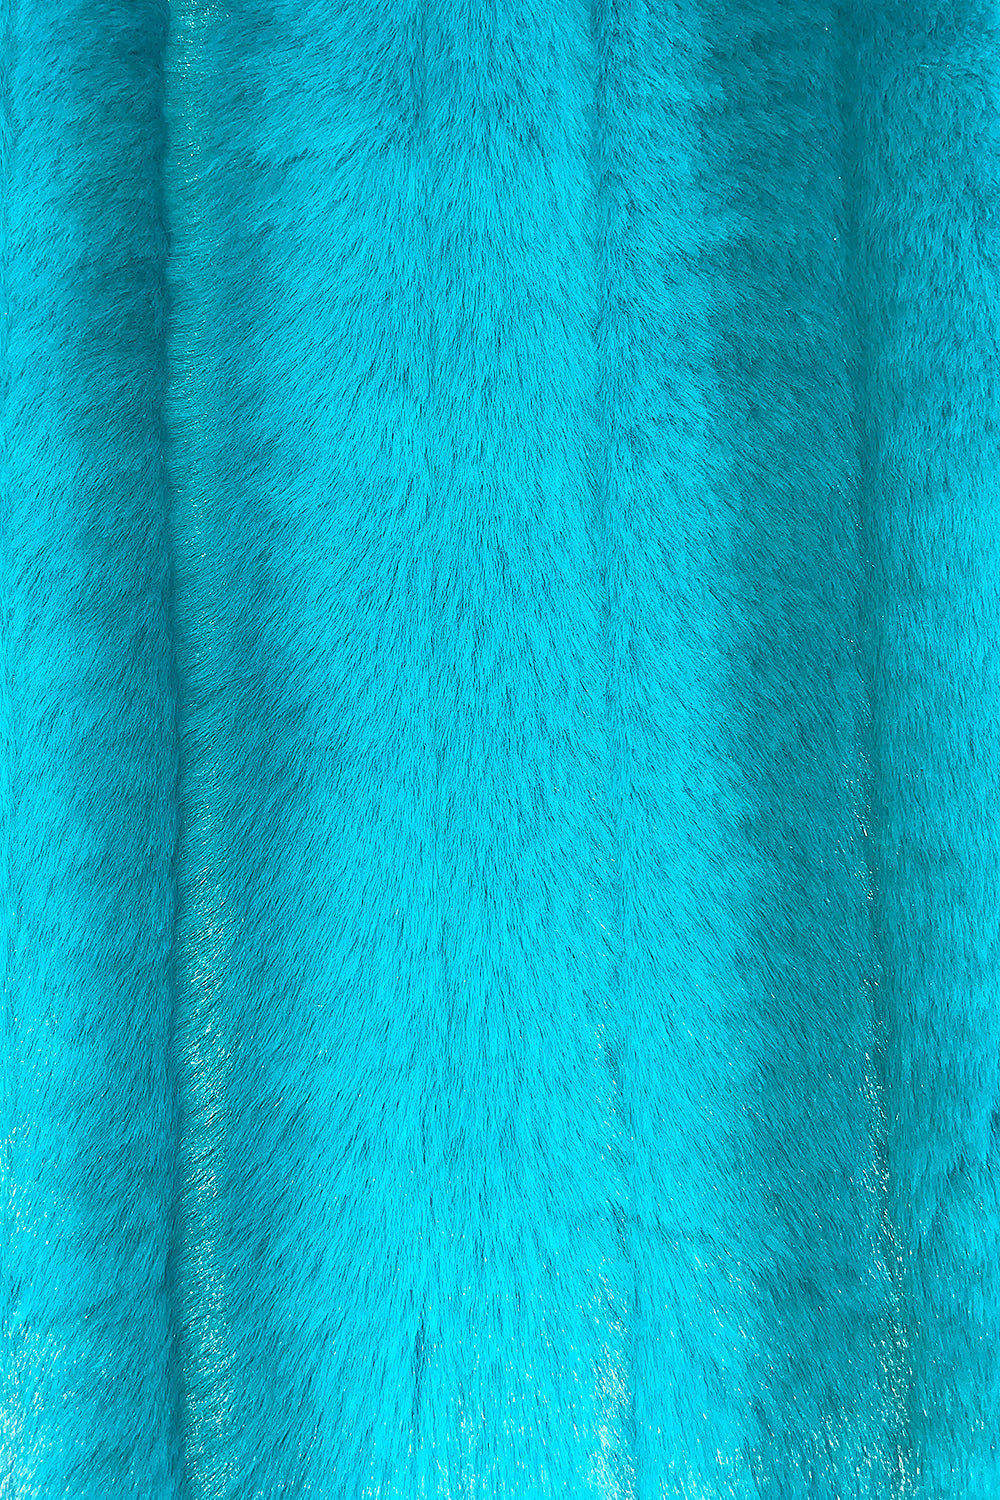 Turquoise Sable Fur Jacket (Limited Edition)